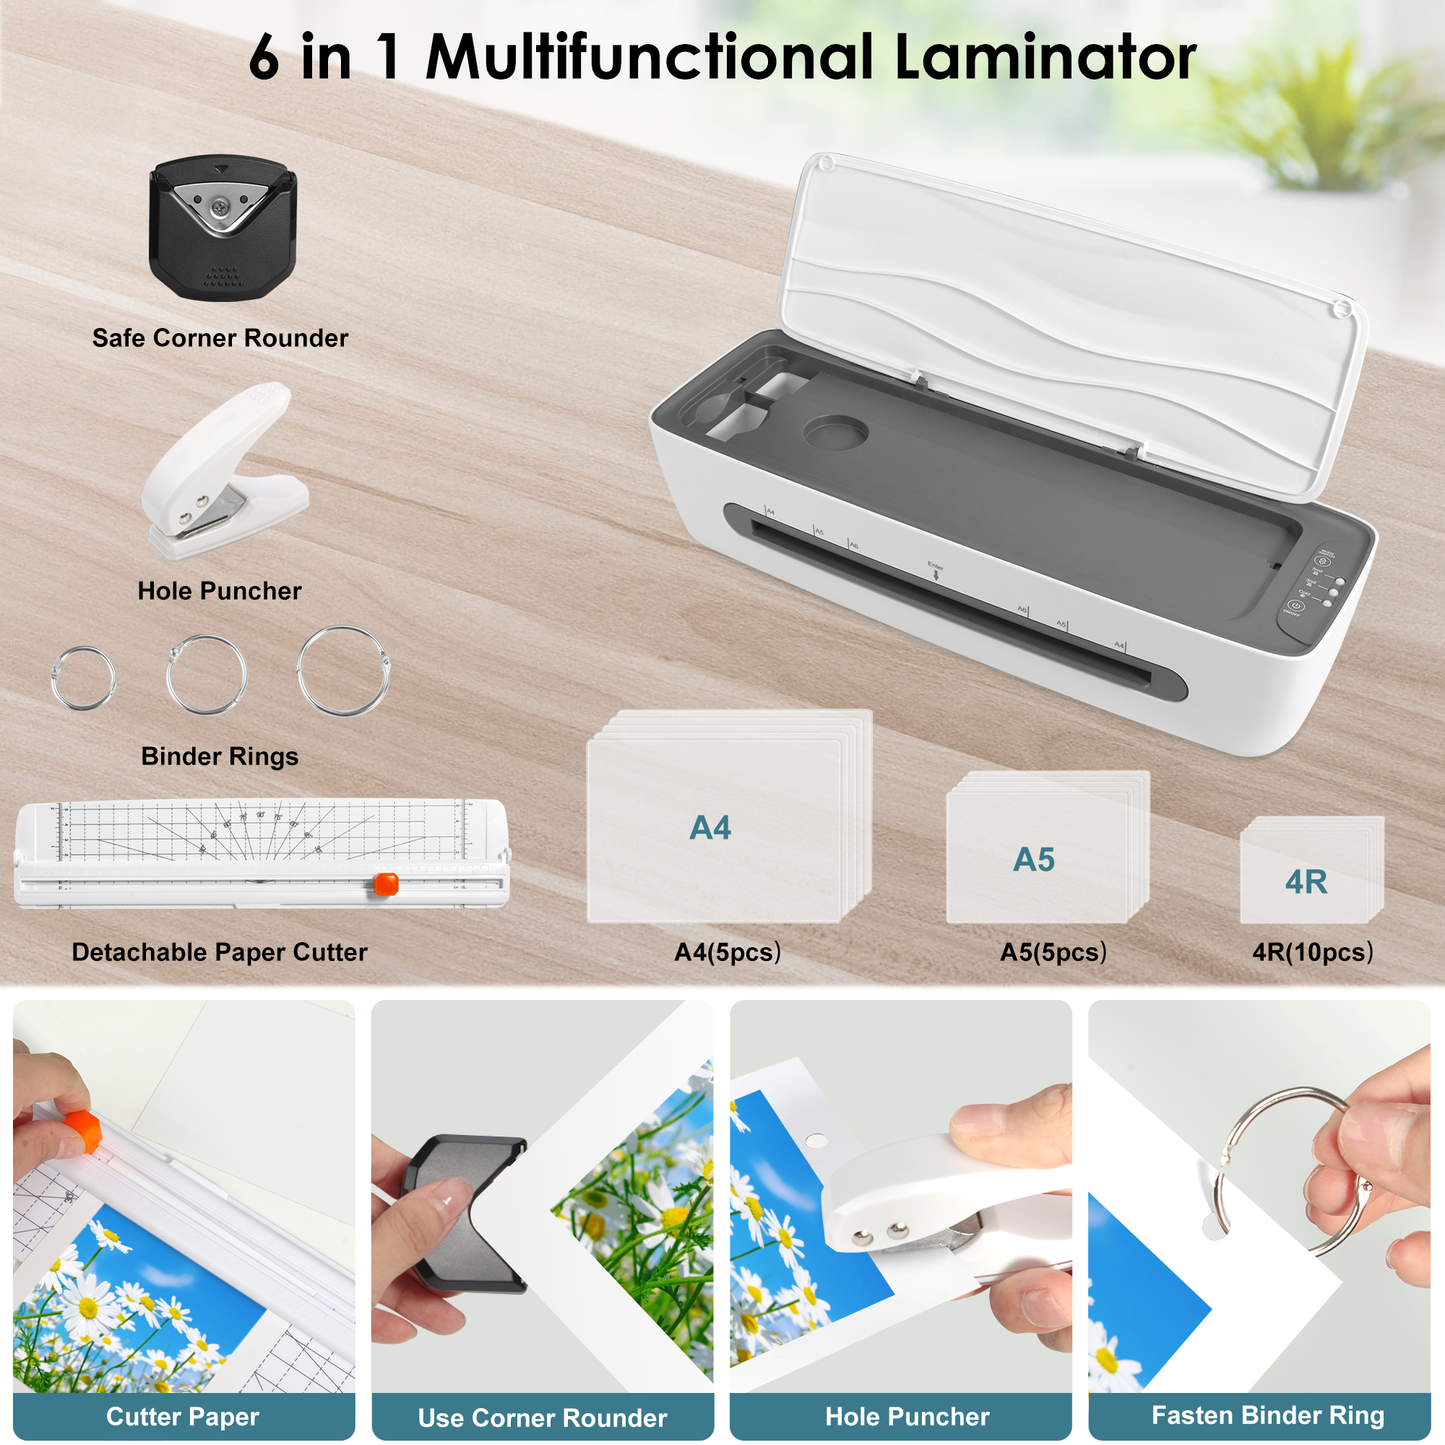 Laminator, A4 Laminator Machine, 9 Inch Cold-Thermal Laminator with 20 Pouches Sheets, 4-in-1 Personal Desktop Laminating Machine Built in Paper Cutter, Corner Rounder, Hole Puncher and Iron Ring